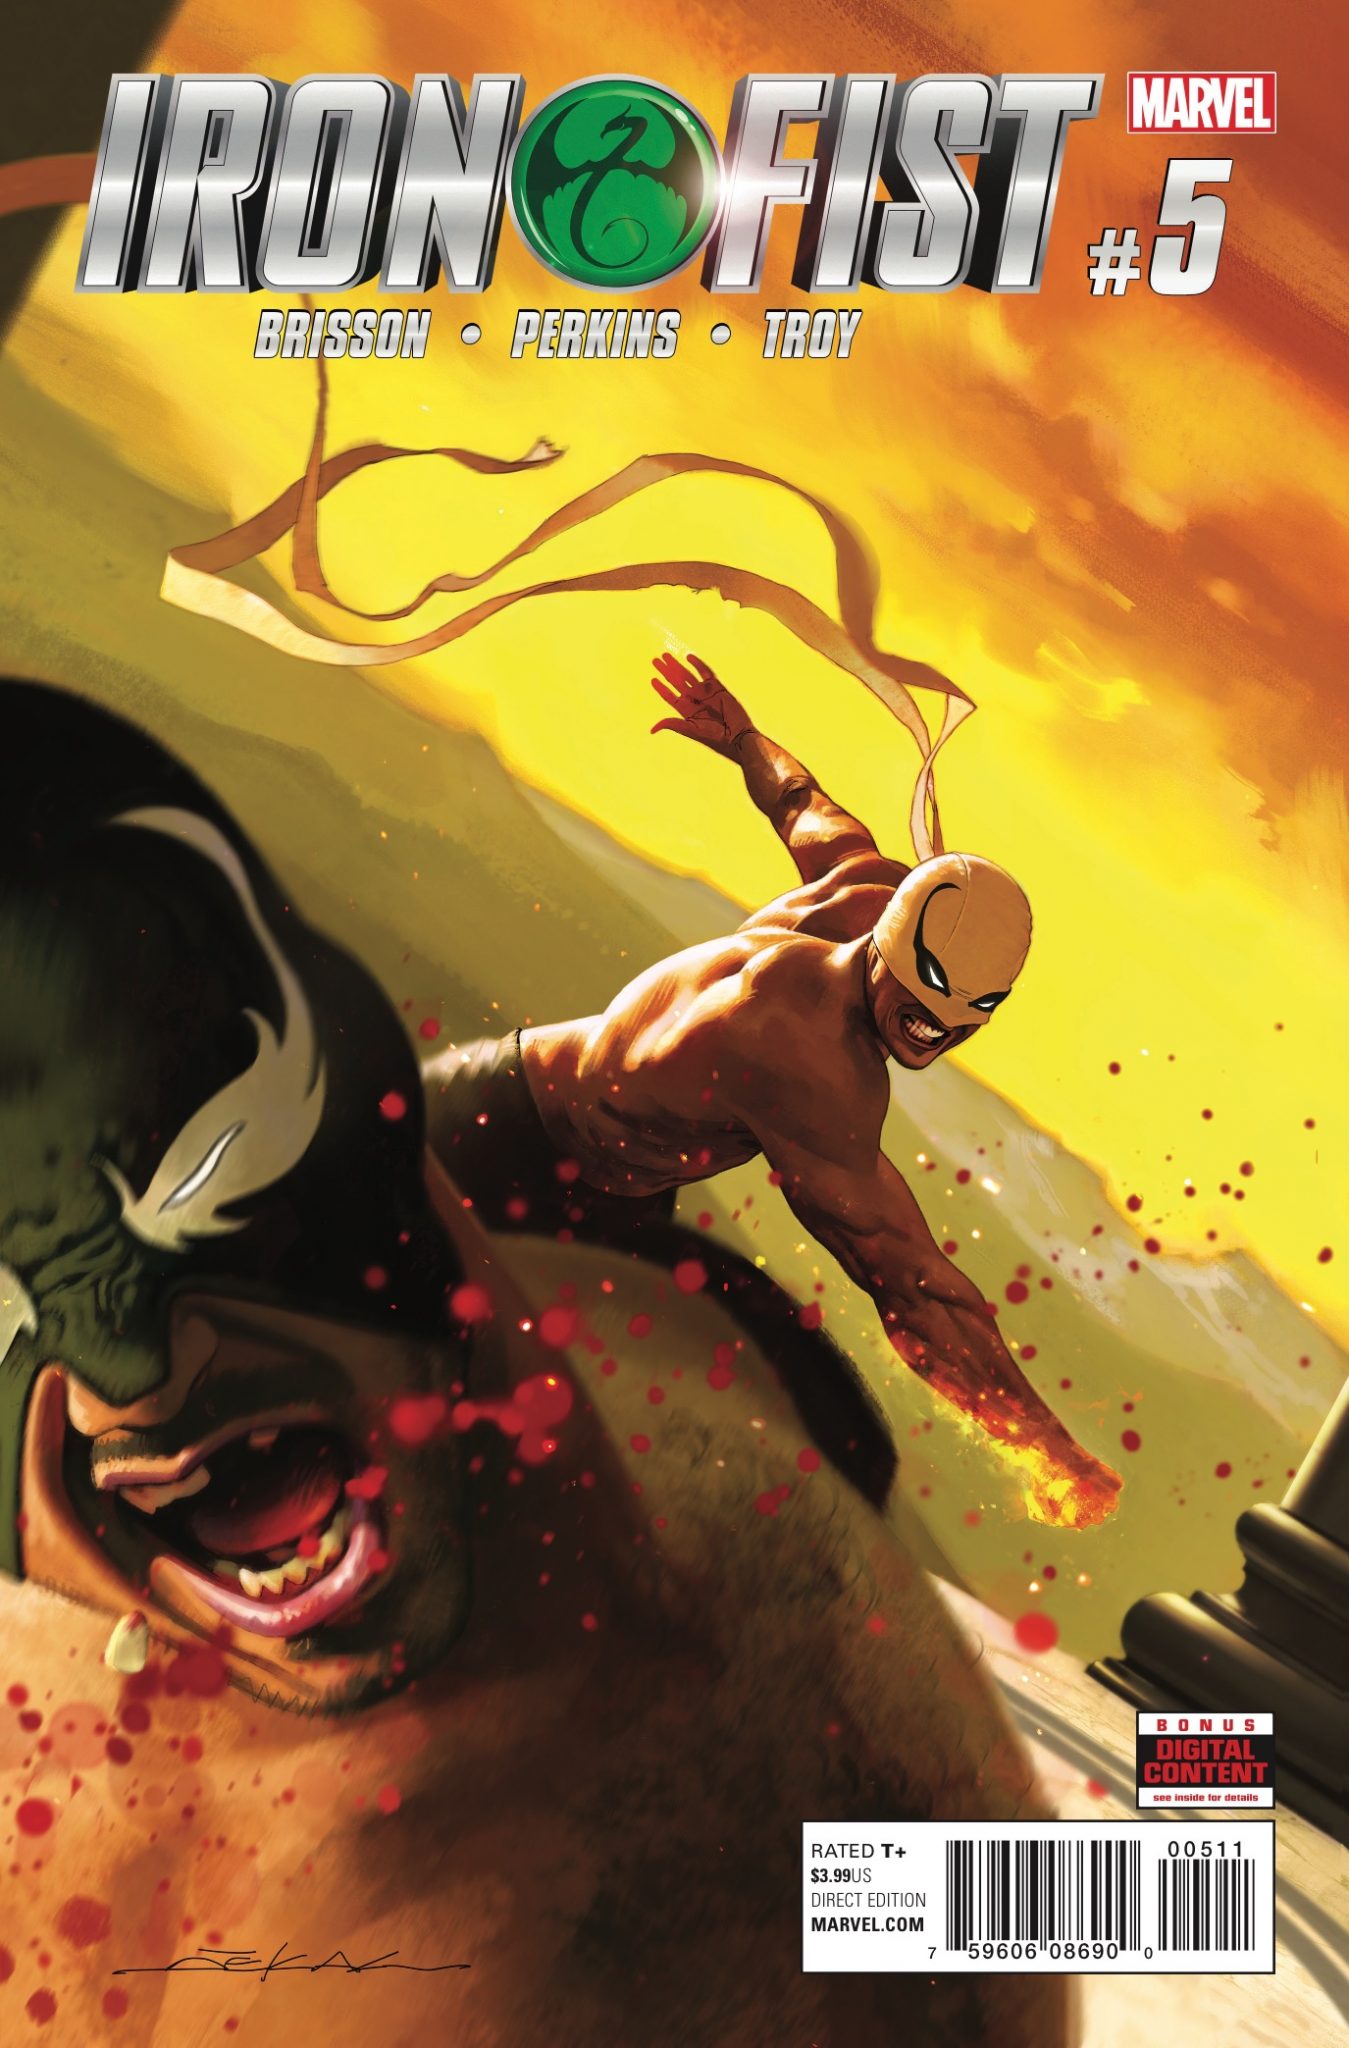 Marvel Preview: Iron Fist #8